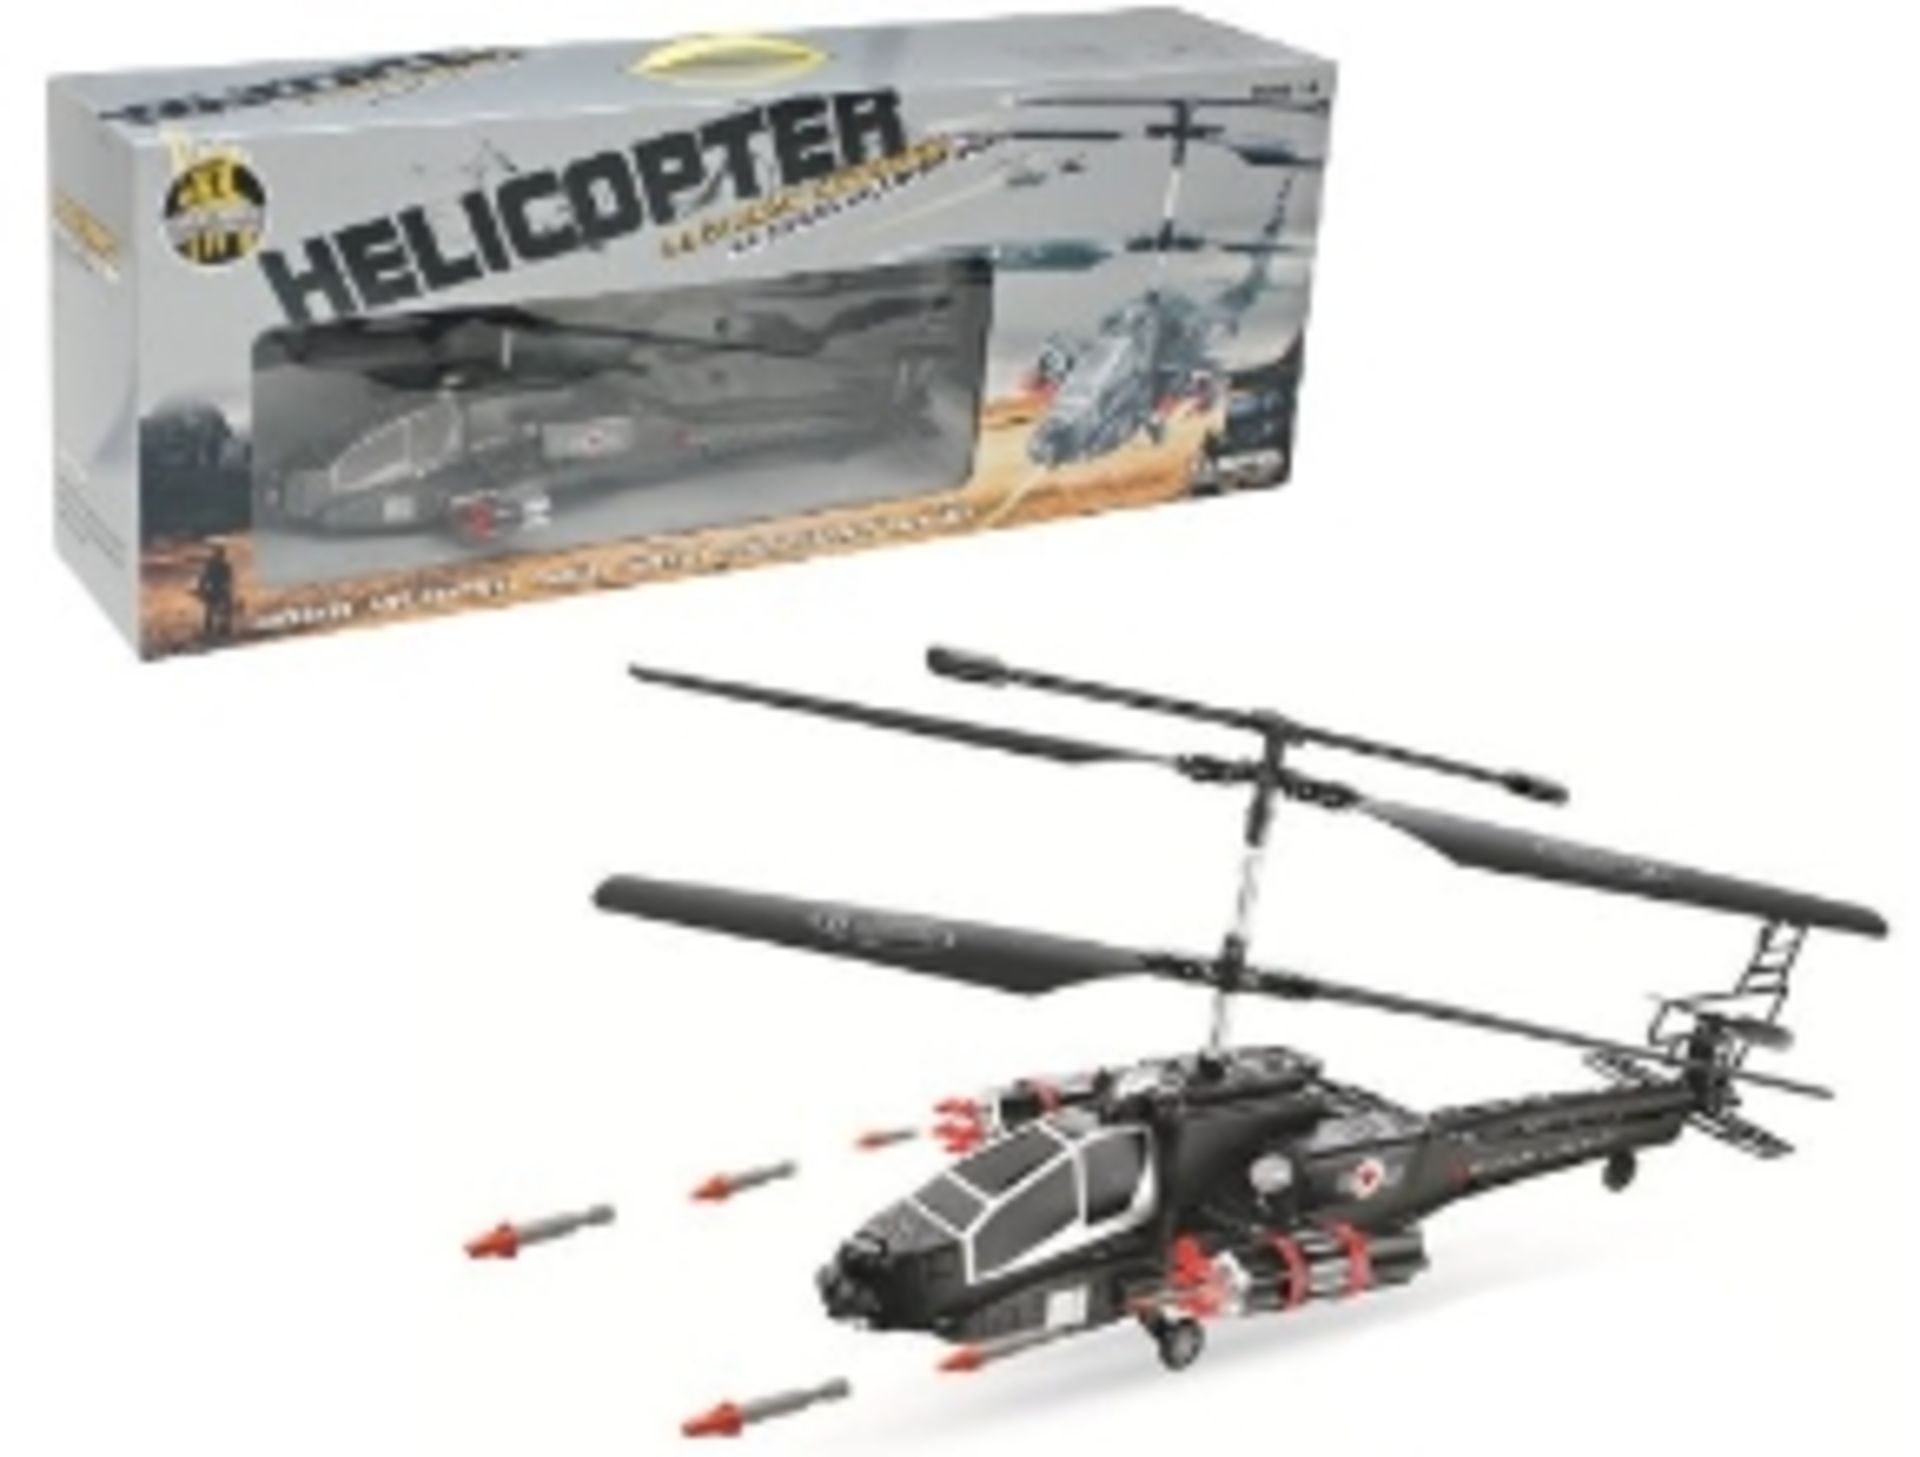 V Remote Control Military Helicopter With Gyro & Twin Firing Rocket Launchers (comes with extra